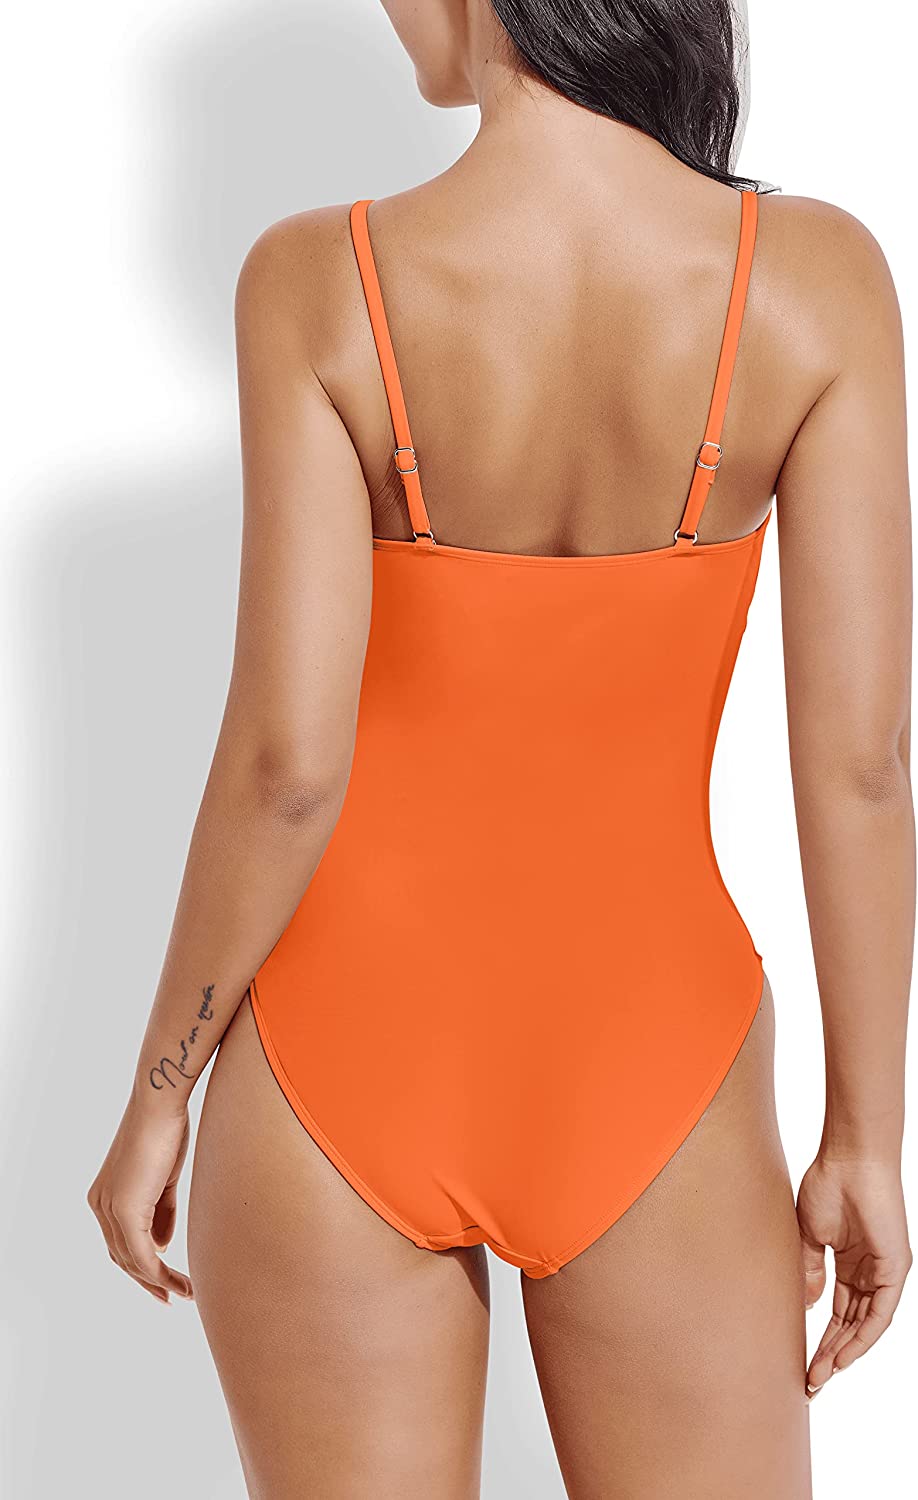 Beautikini Women's One Piece Swimsuit, Tummy Control Vintage Bathing Suit Ruched Slim Bandeau Swimwear with Adjustable Straps